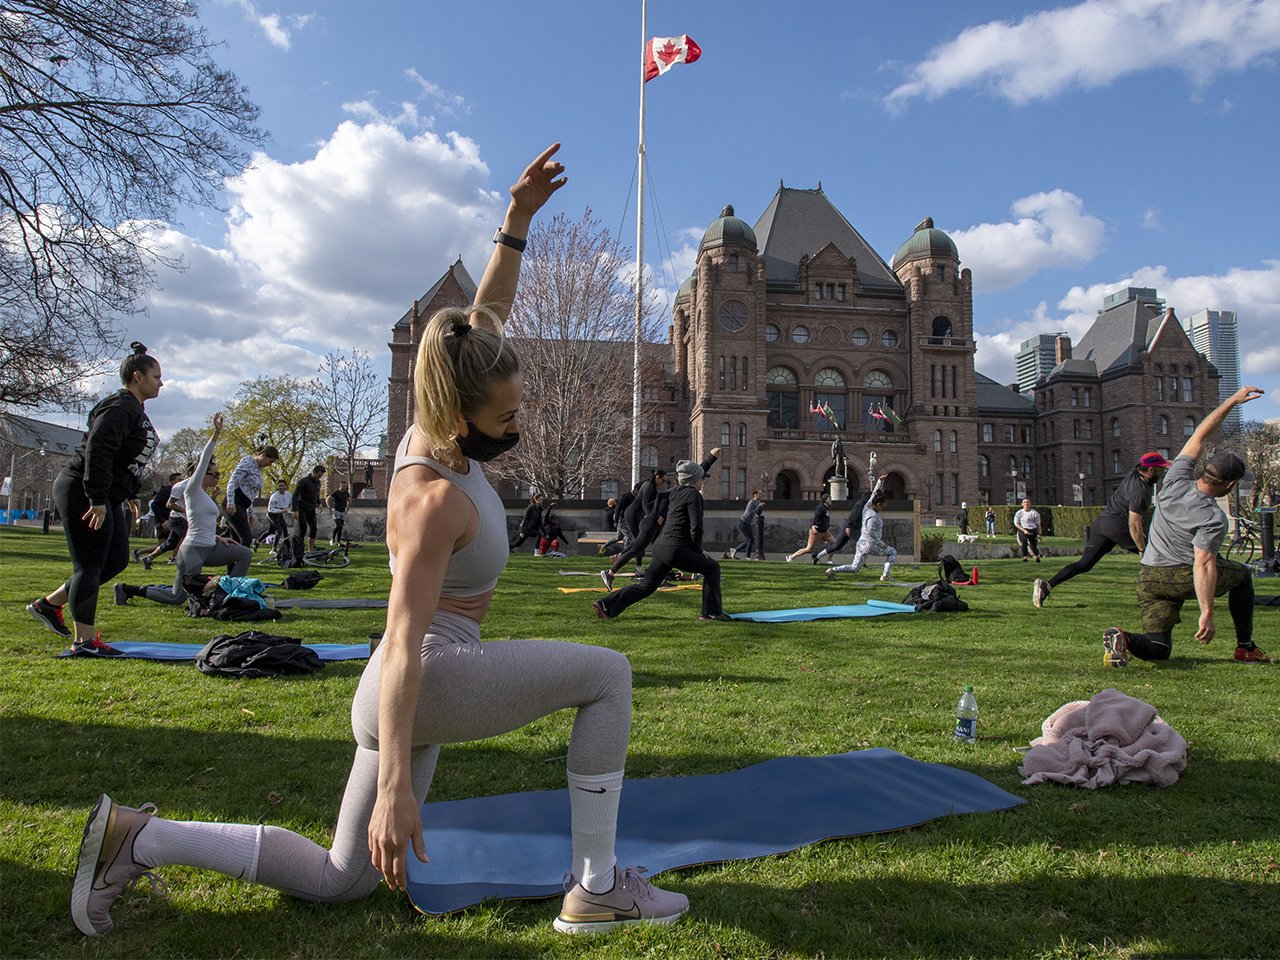 Members of the fitness community gather for a workout on the lawn of Queen's Park in Toronto on Wednesday, April 14, 2021.